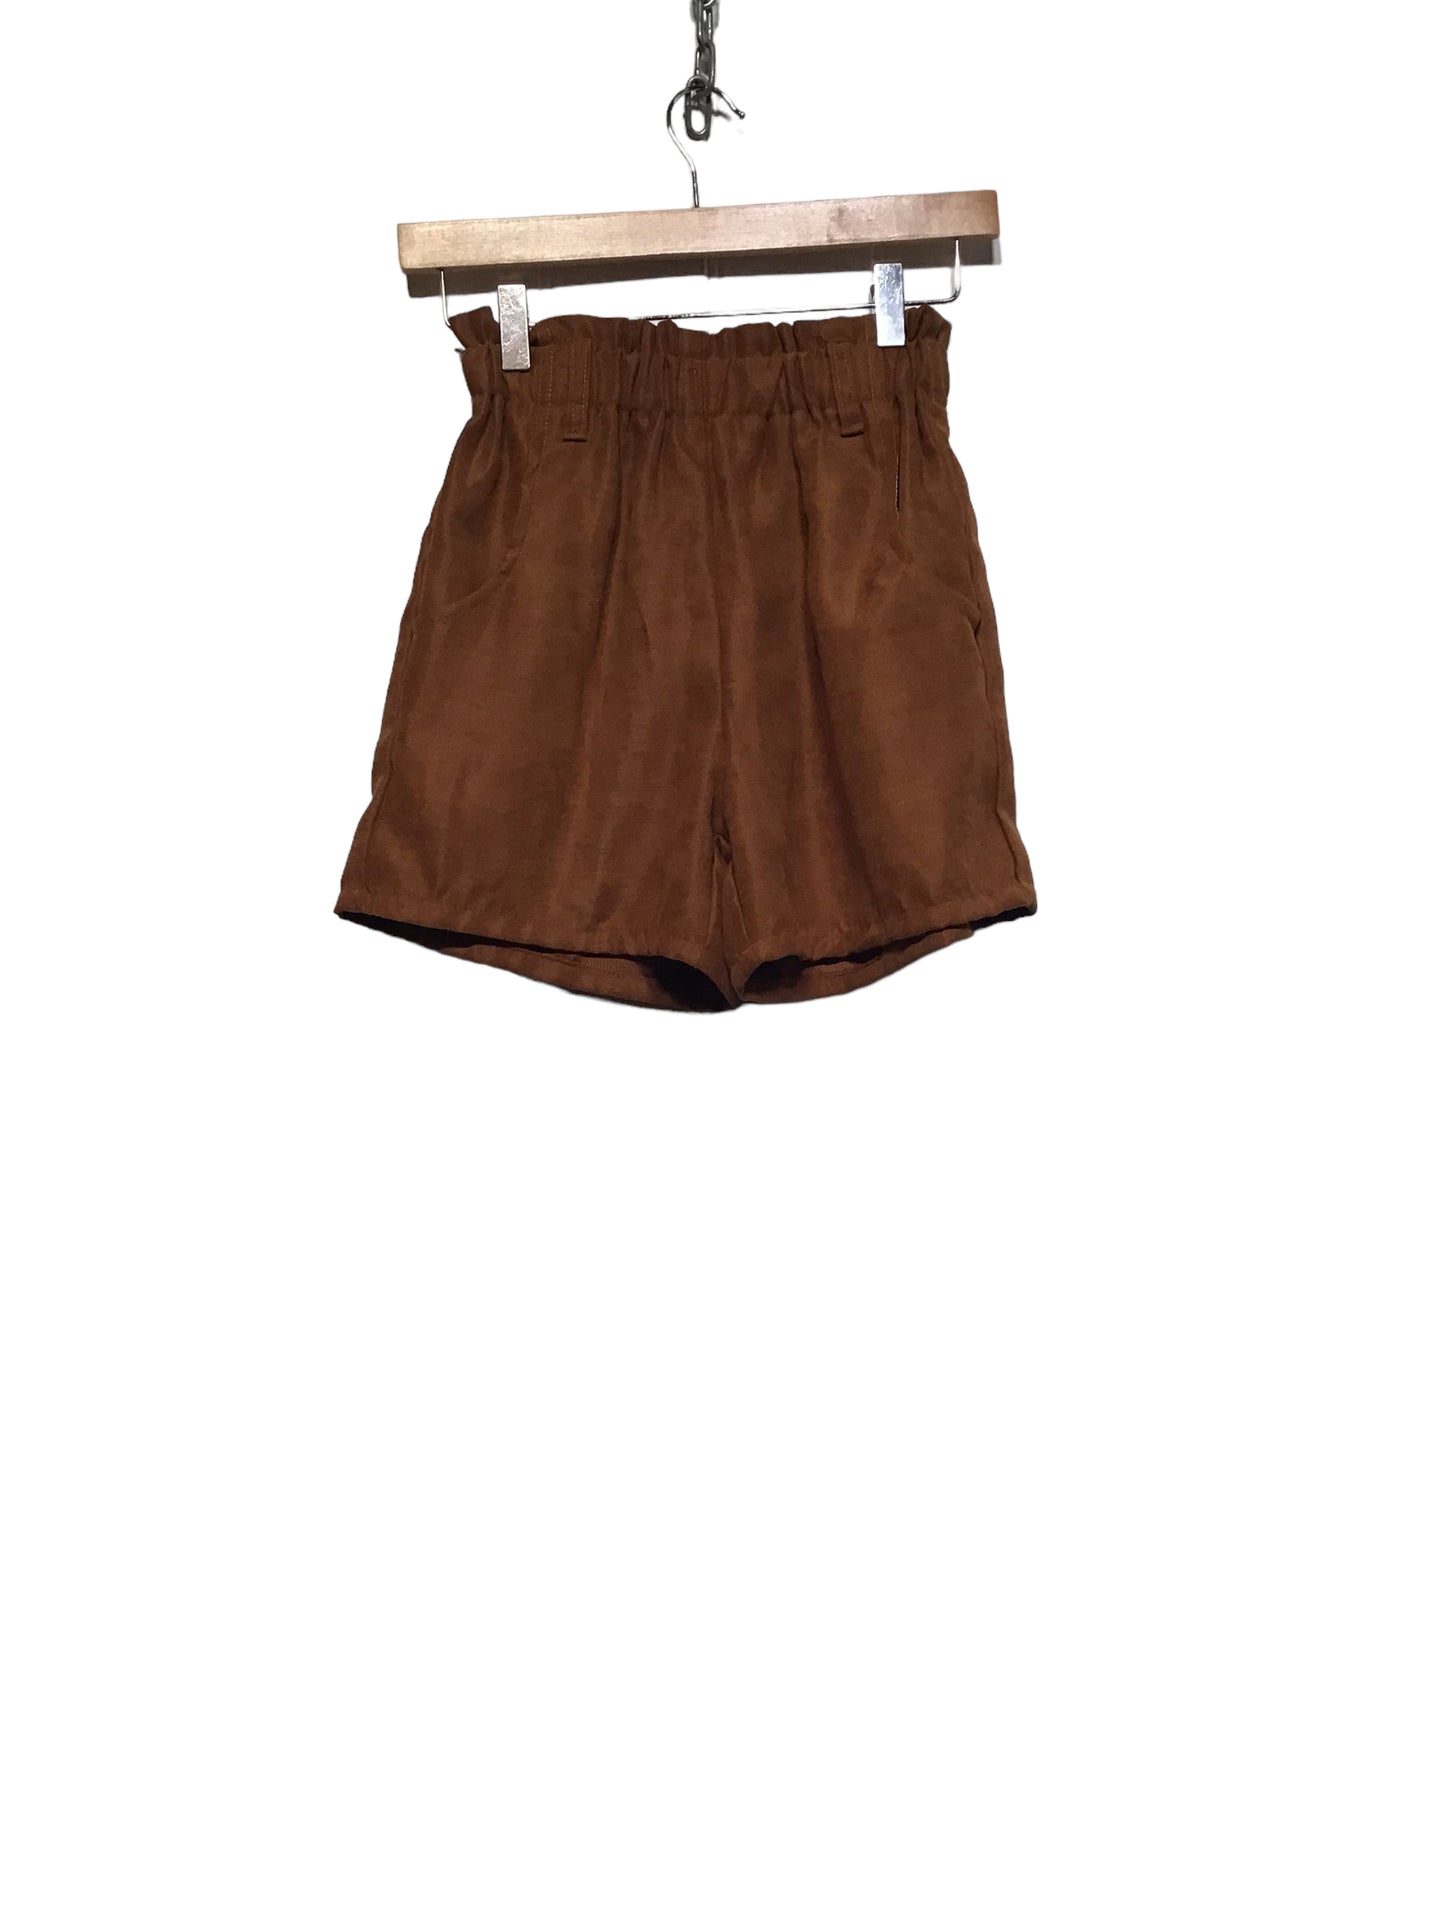 Brown Summer Shorts (Size S)